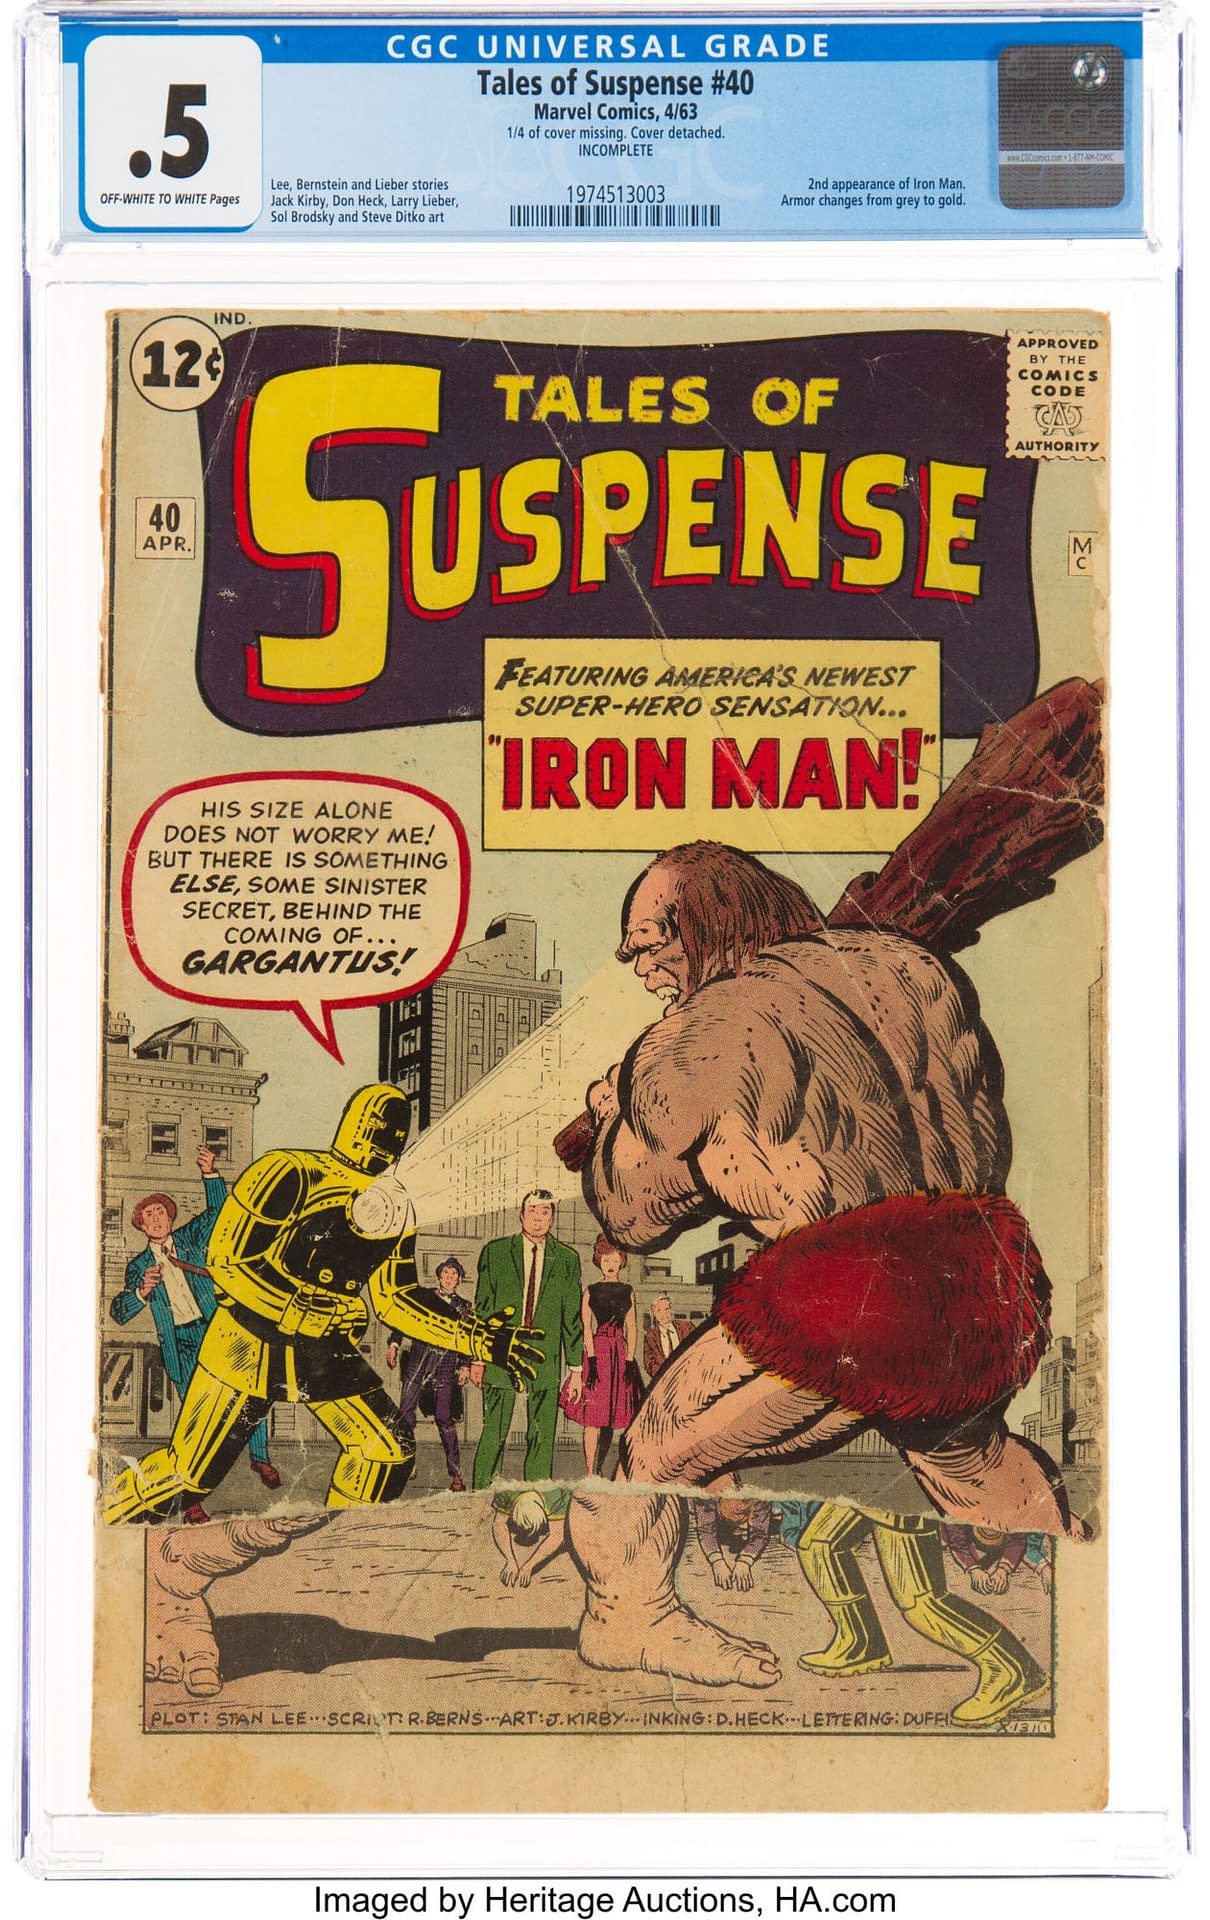 Iron Man Goes Gold in Early Tales of Suspense, Up for Auction